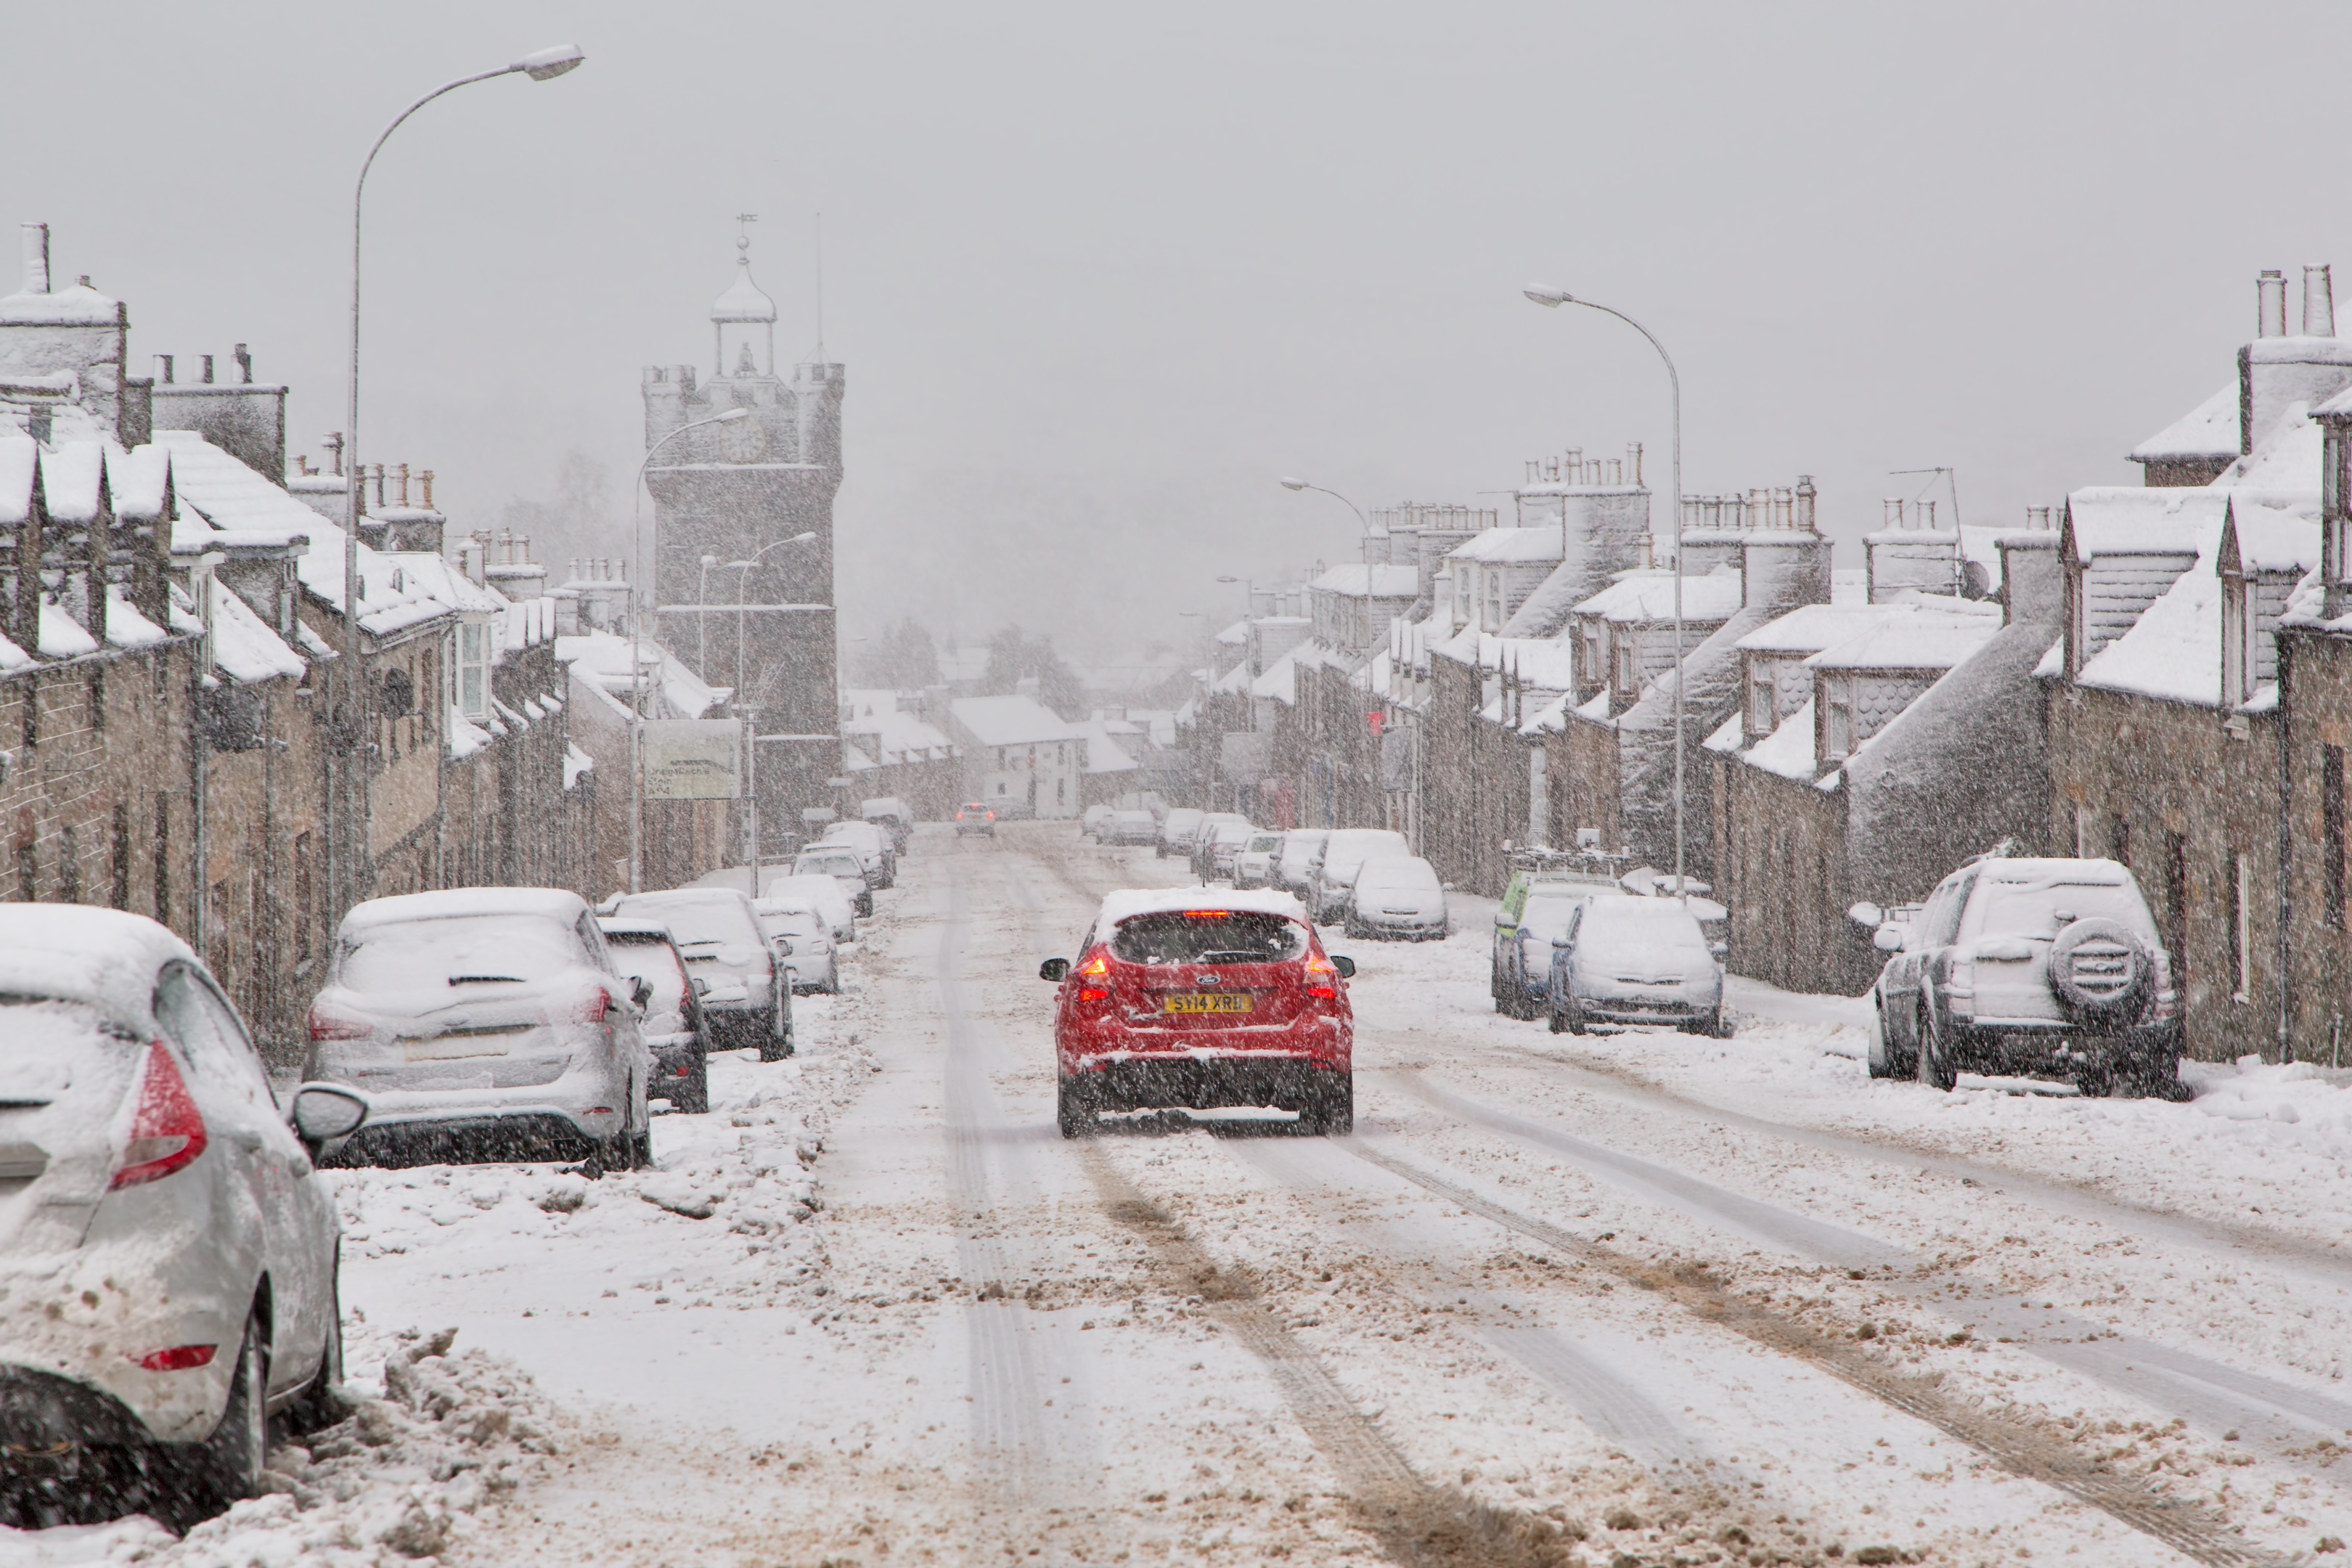 Moray  has been hit by some of the worst of the winter weather